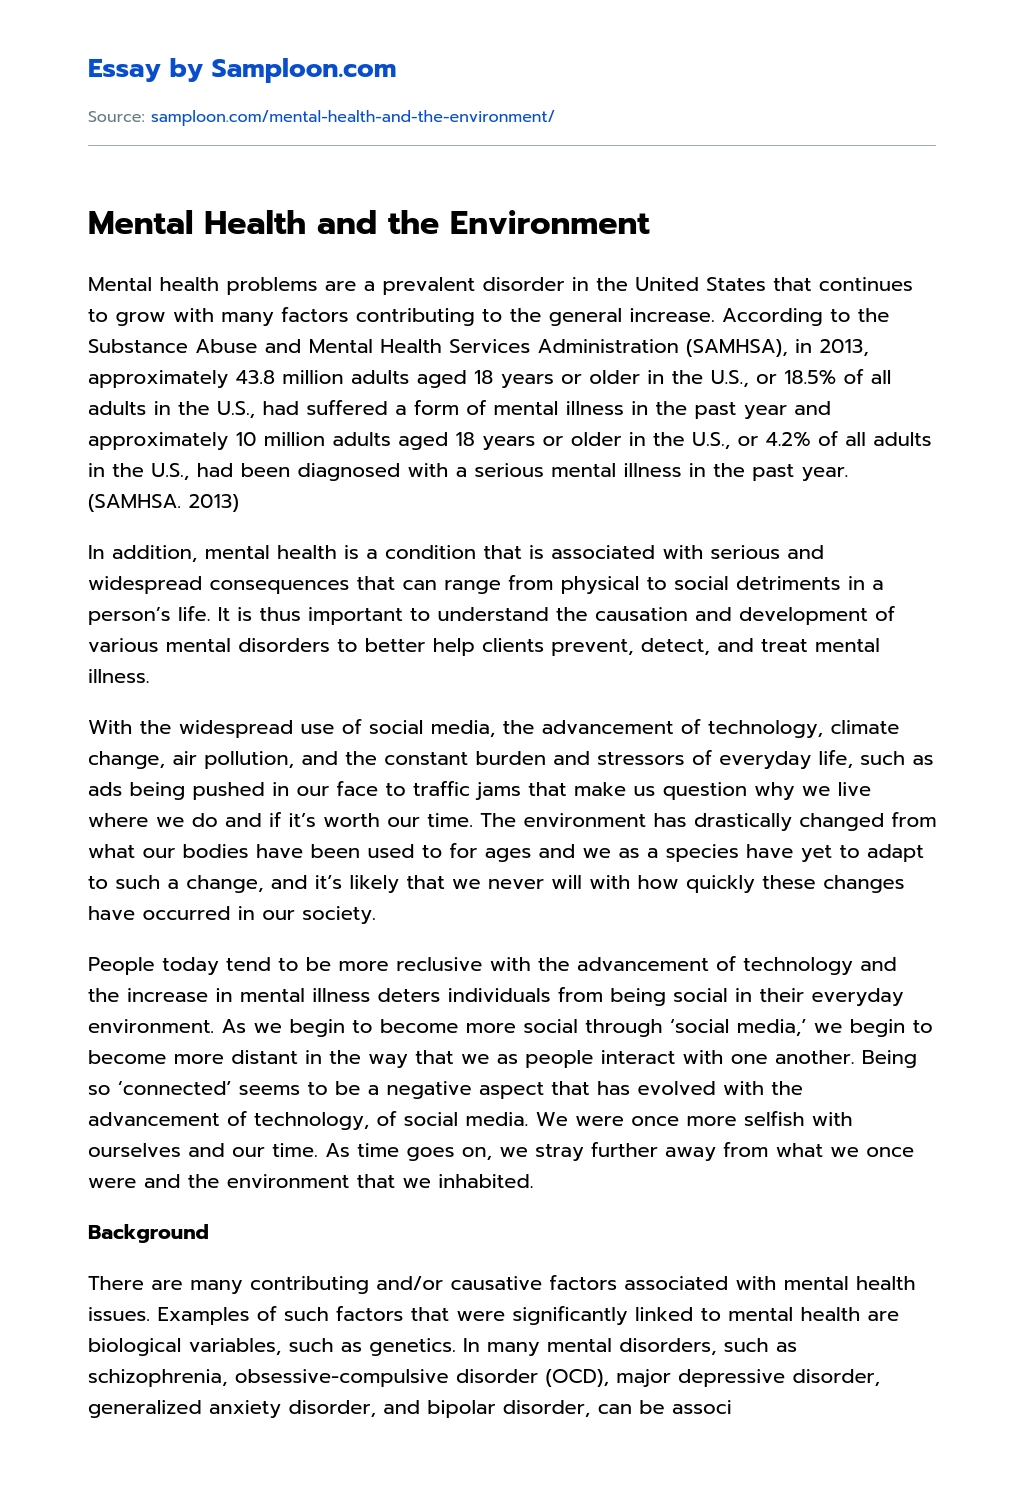 Mental Health and the Environment essay